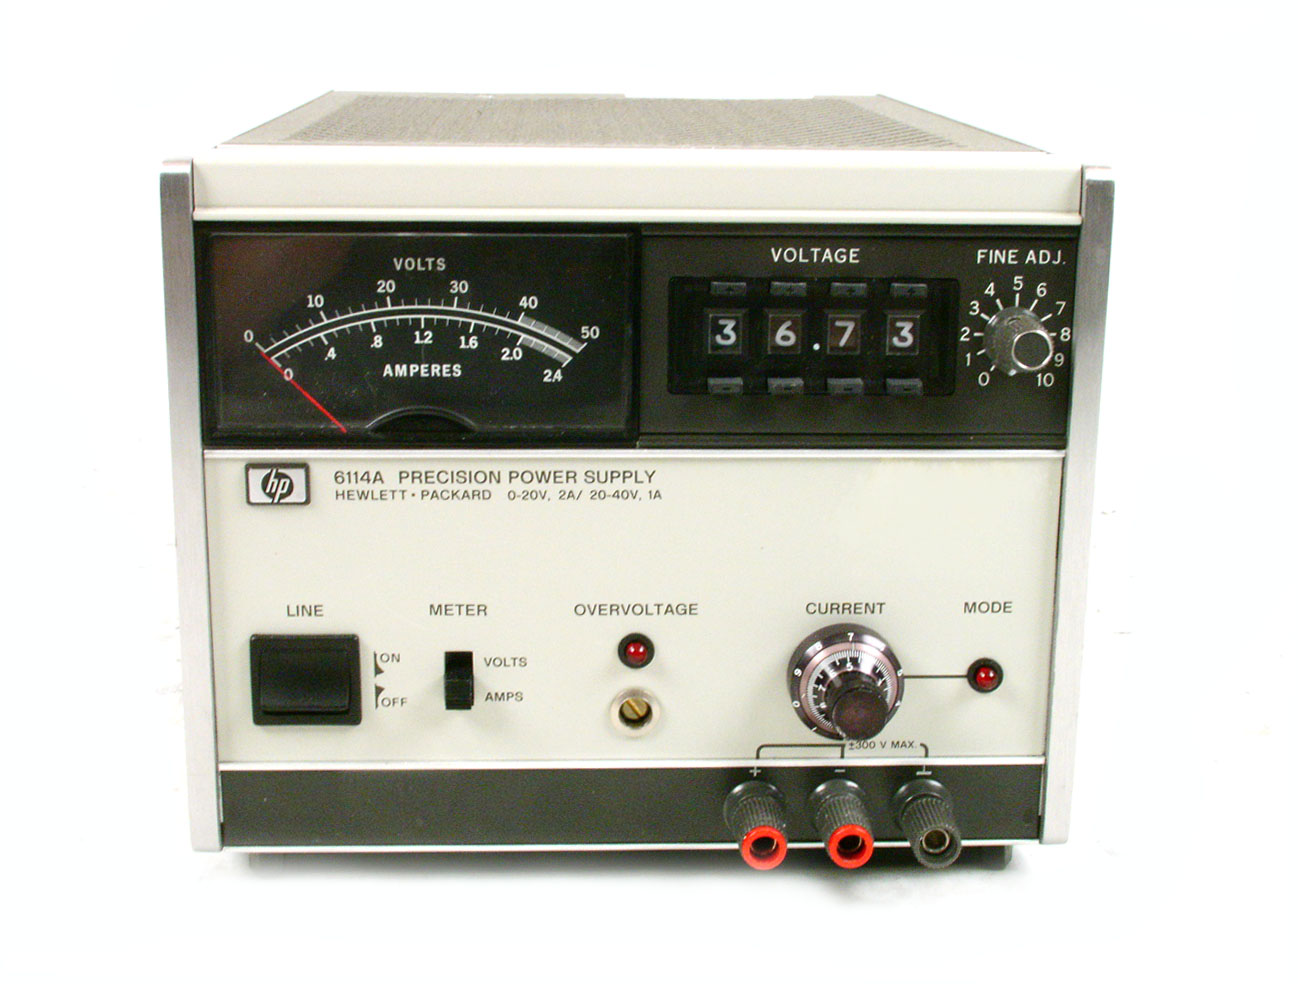 HP E3615A 20 Volt 3 Amp DC Power Supply for sale online 